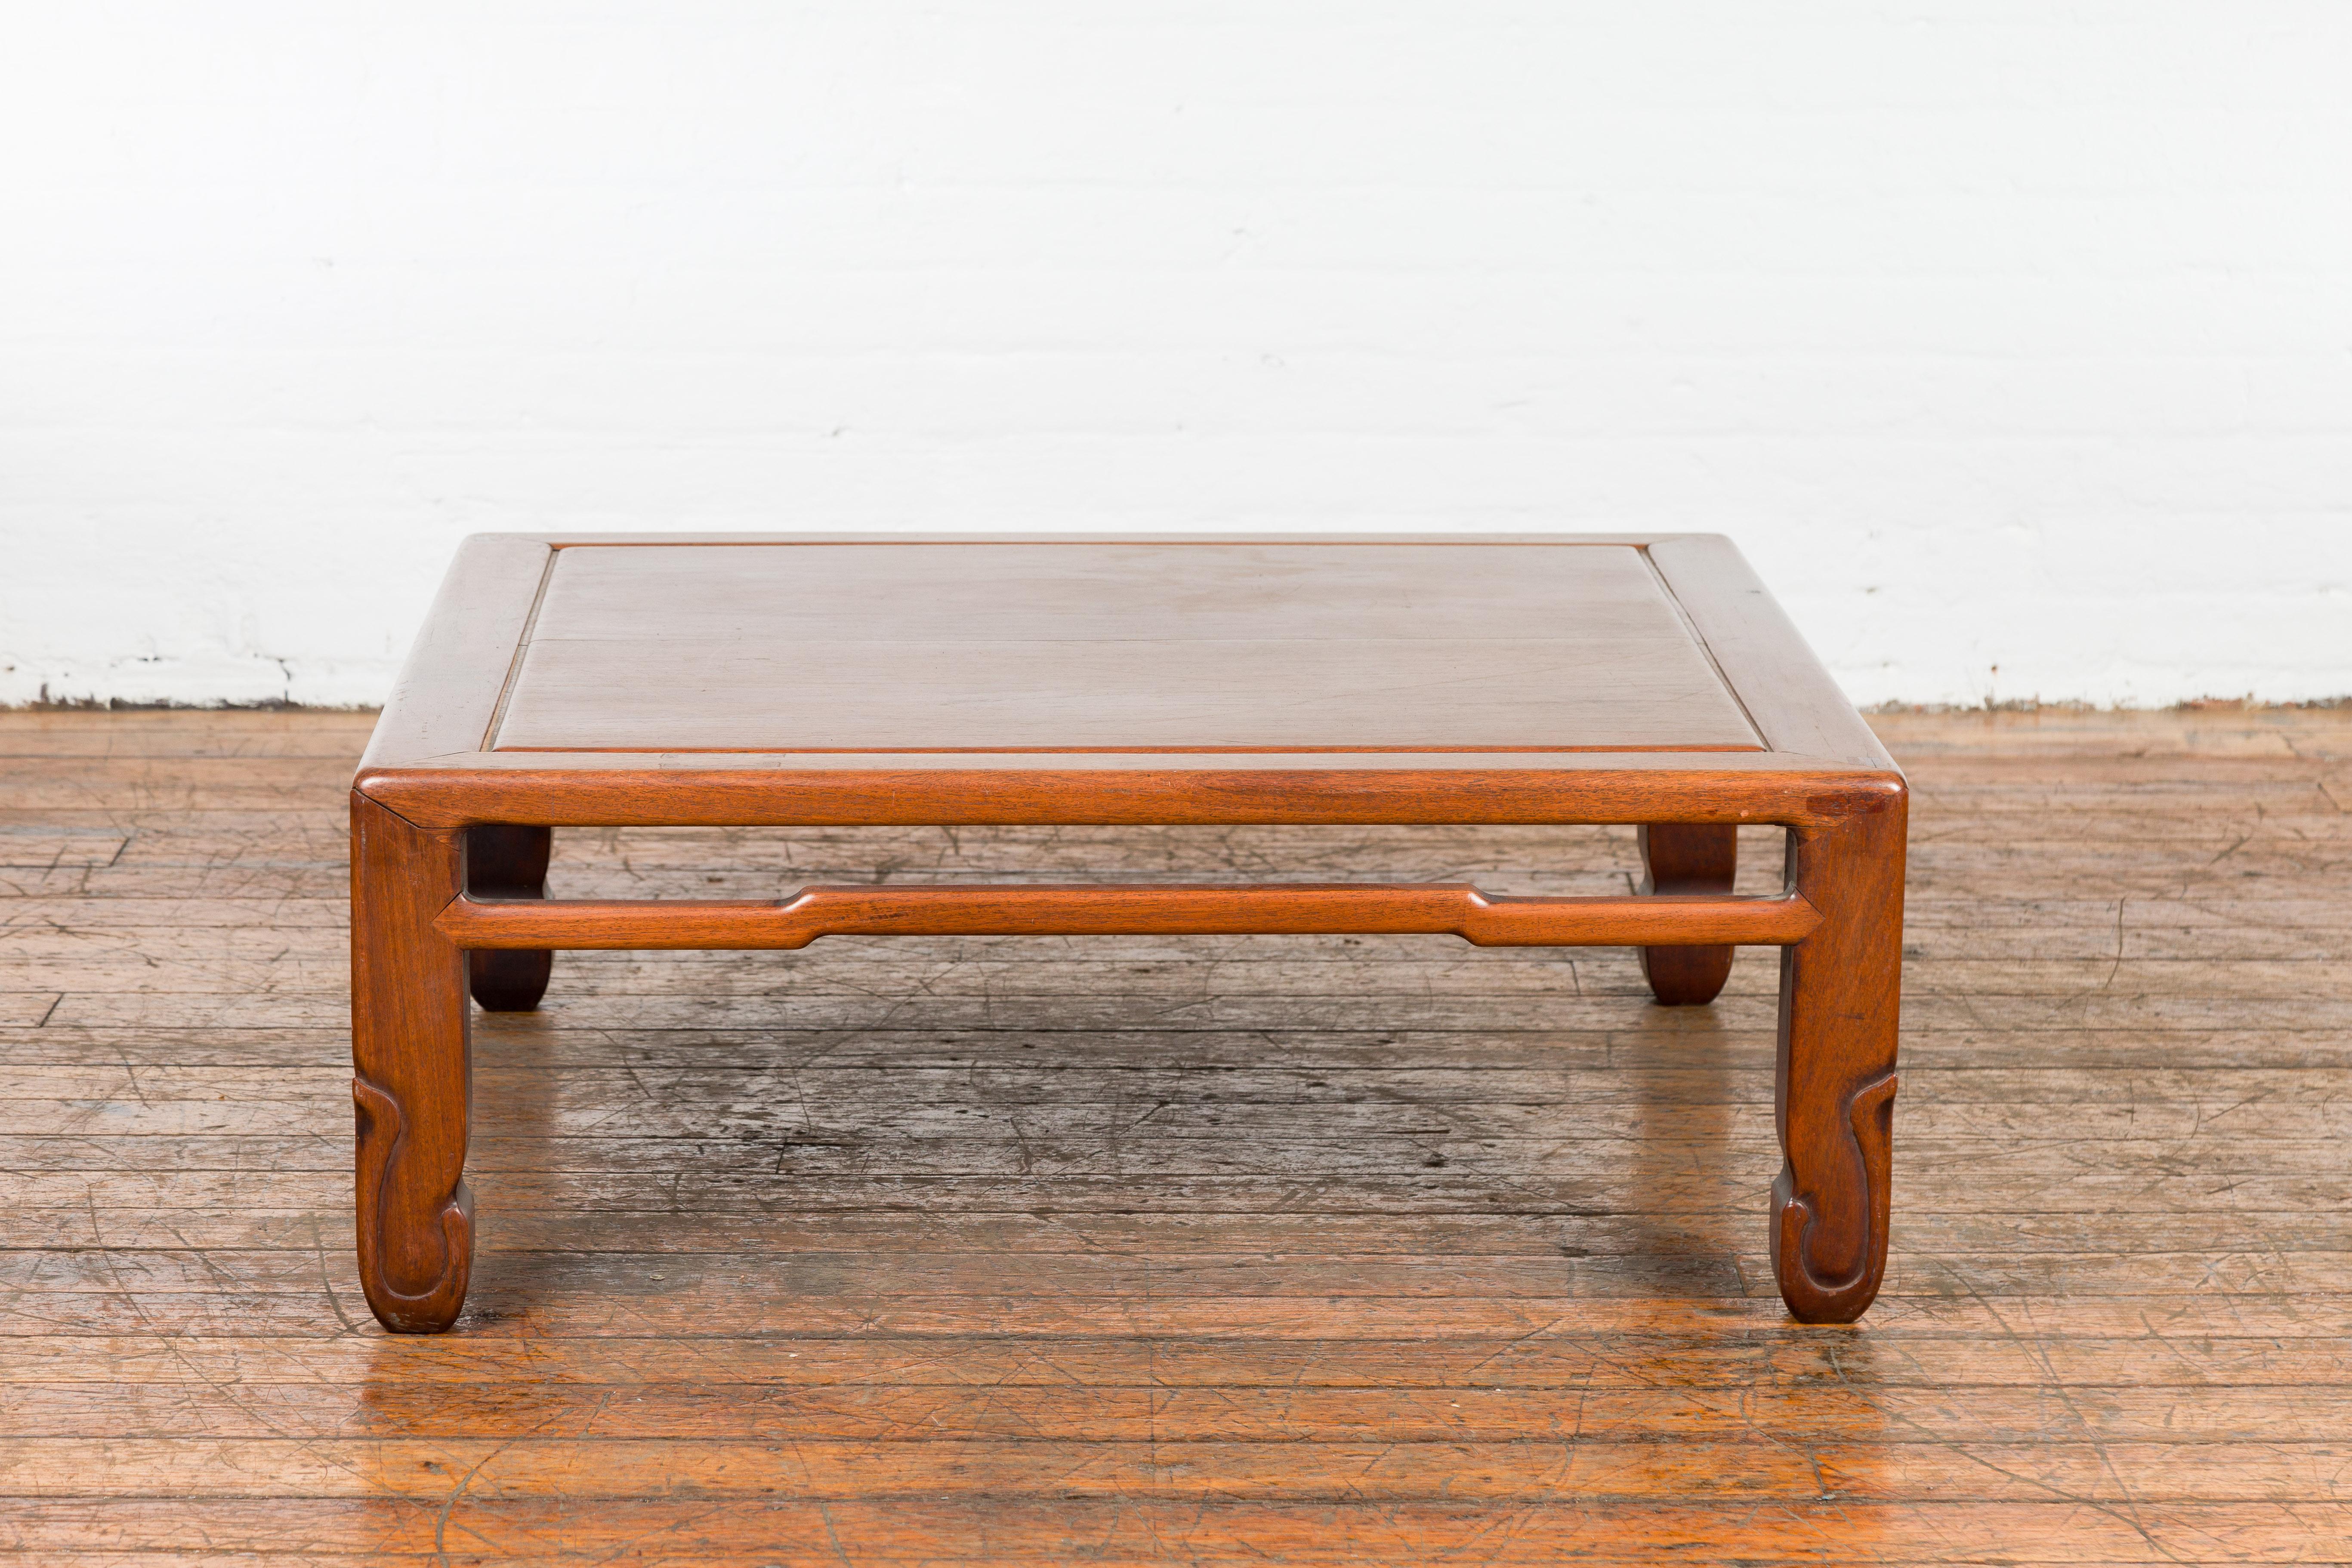 19th Century Low Kang Coffee Table with Humpback Stretcher and Horsehoof Feet For Sale 6